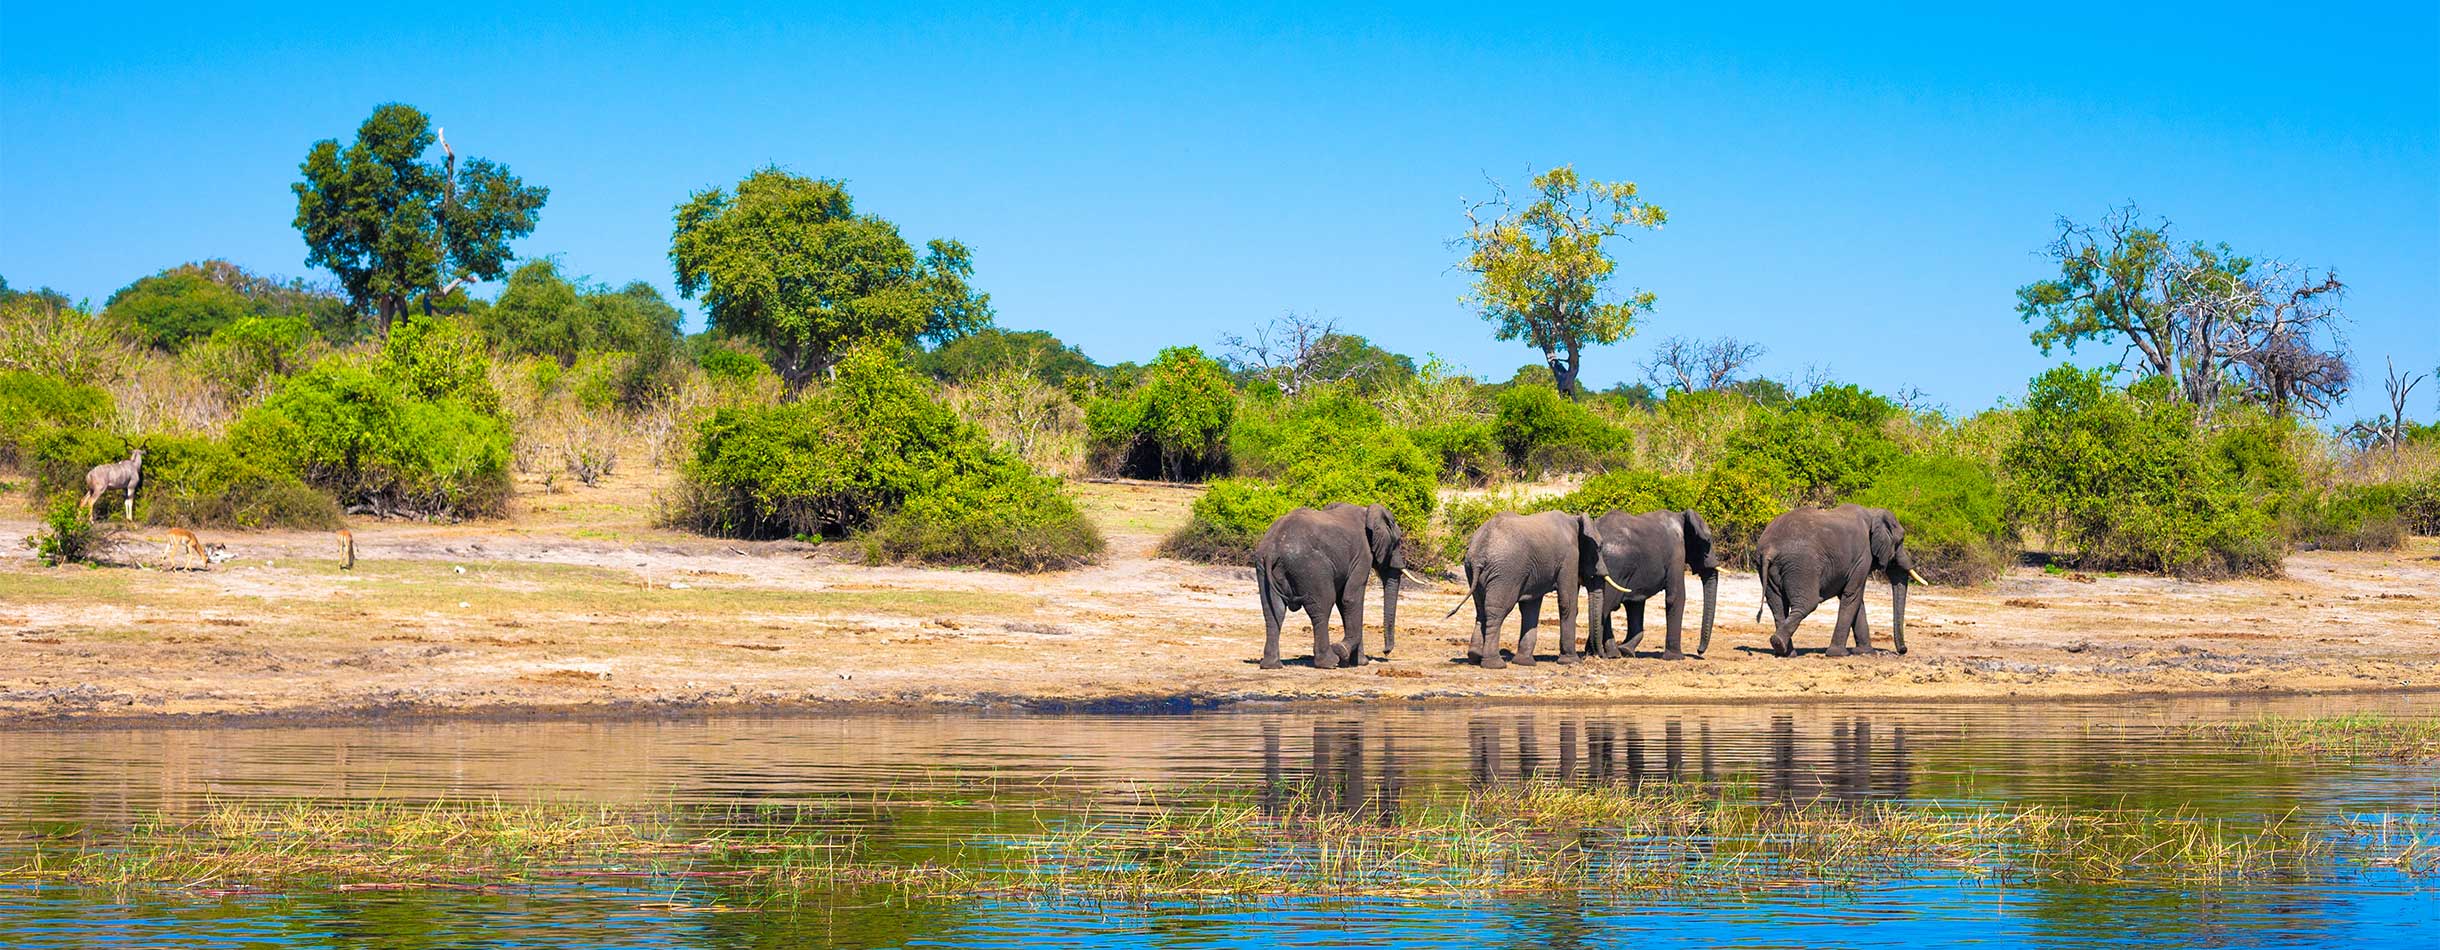 Elephants in south Africa